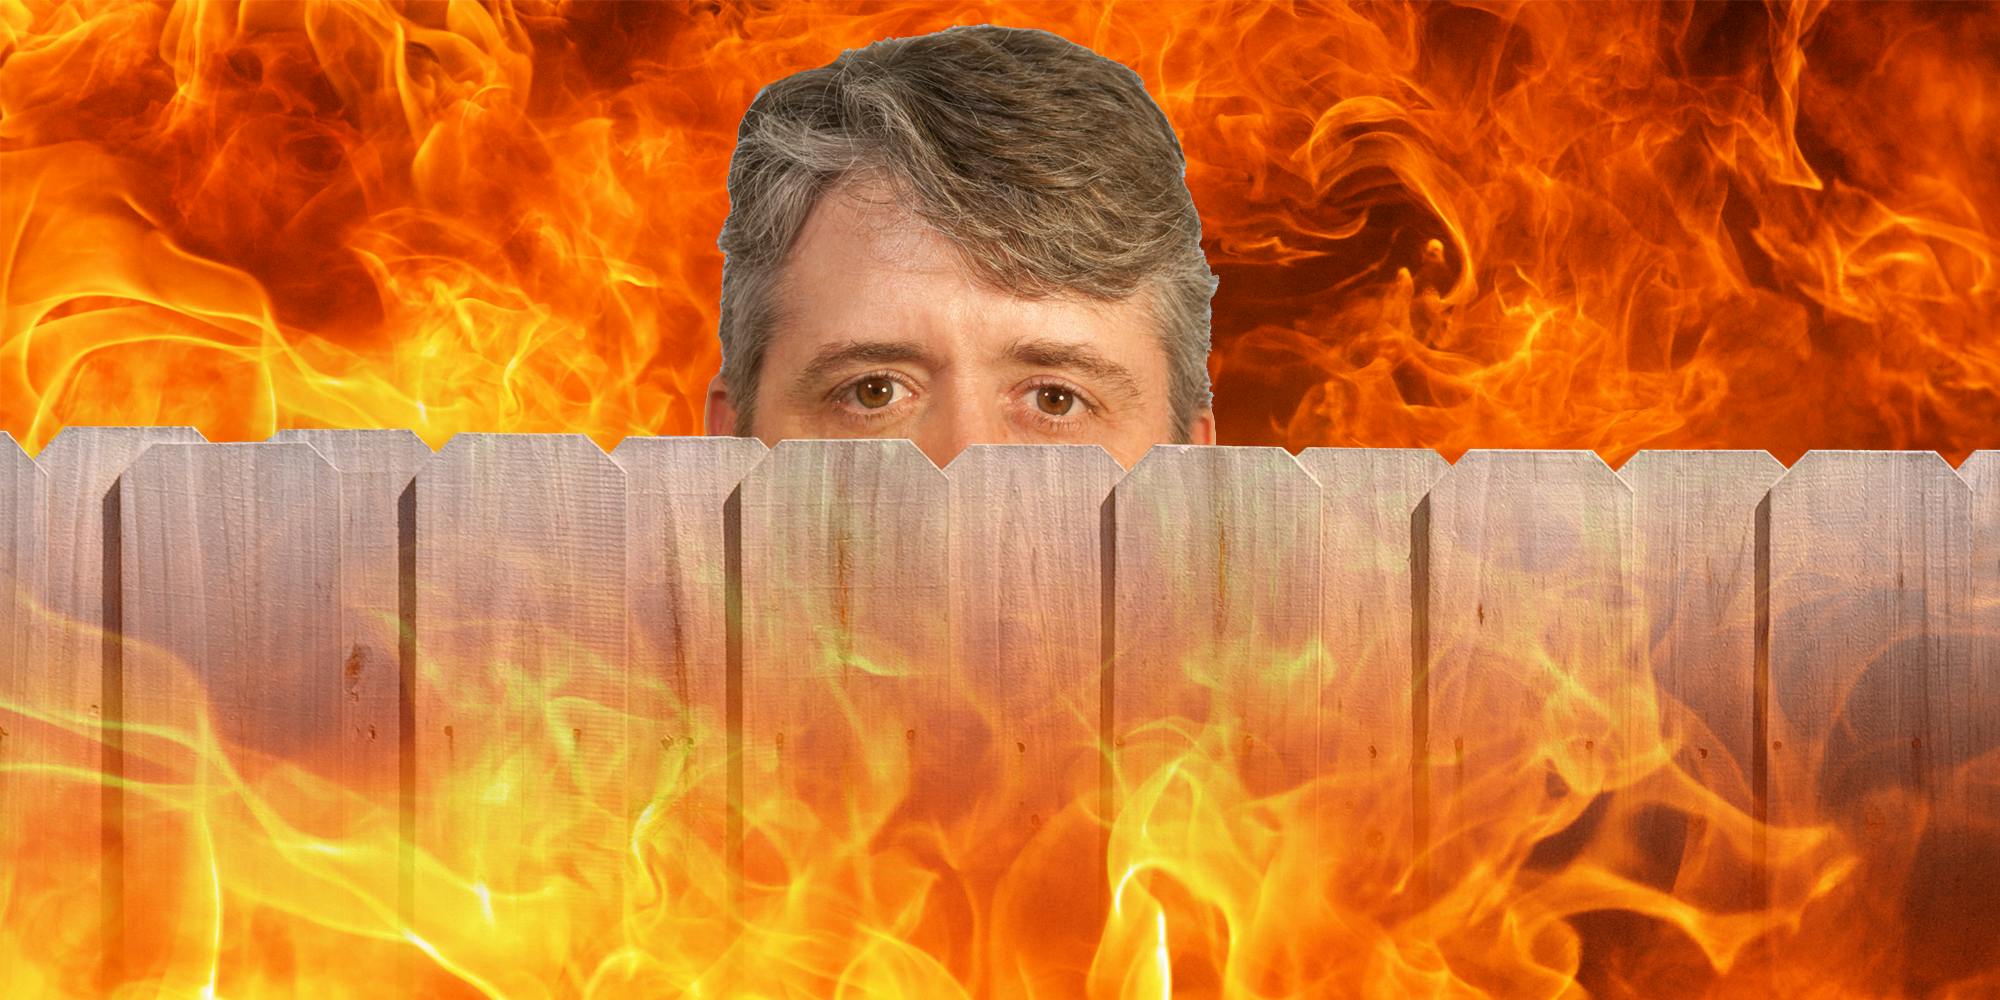 Neighbor peeking over fence surrounded by flames